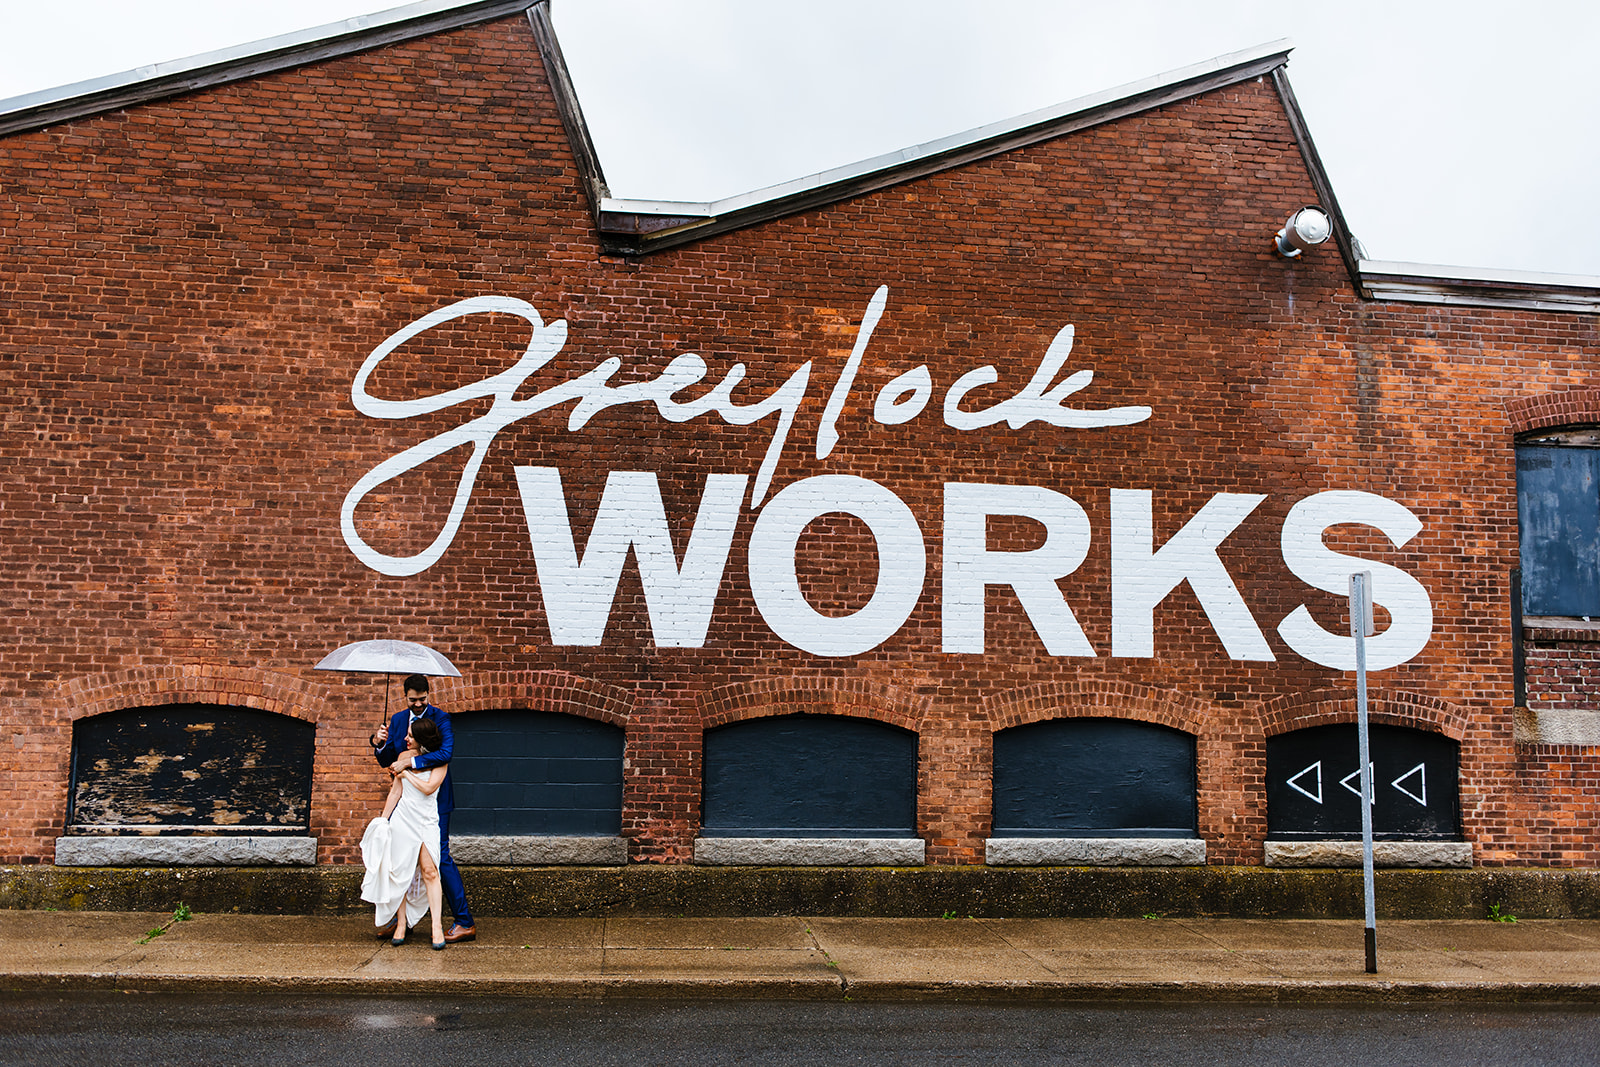 Bride and groom pose in front of a building that says Grelock Works on it.